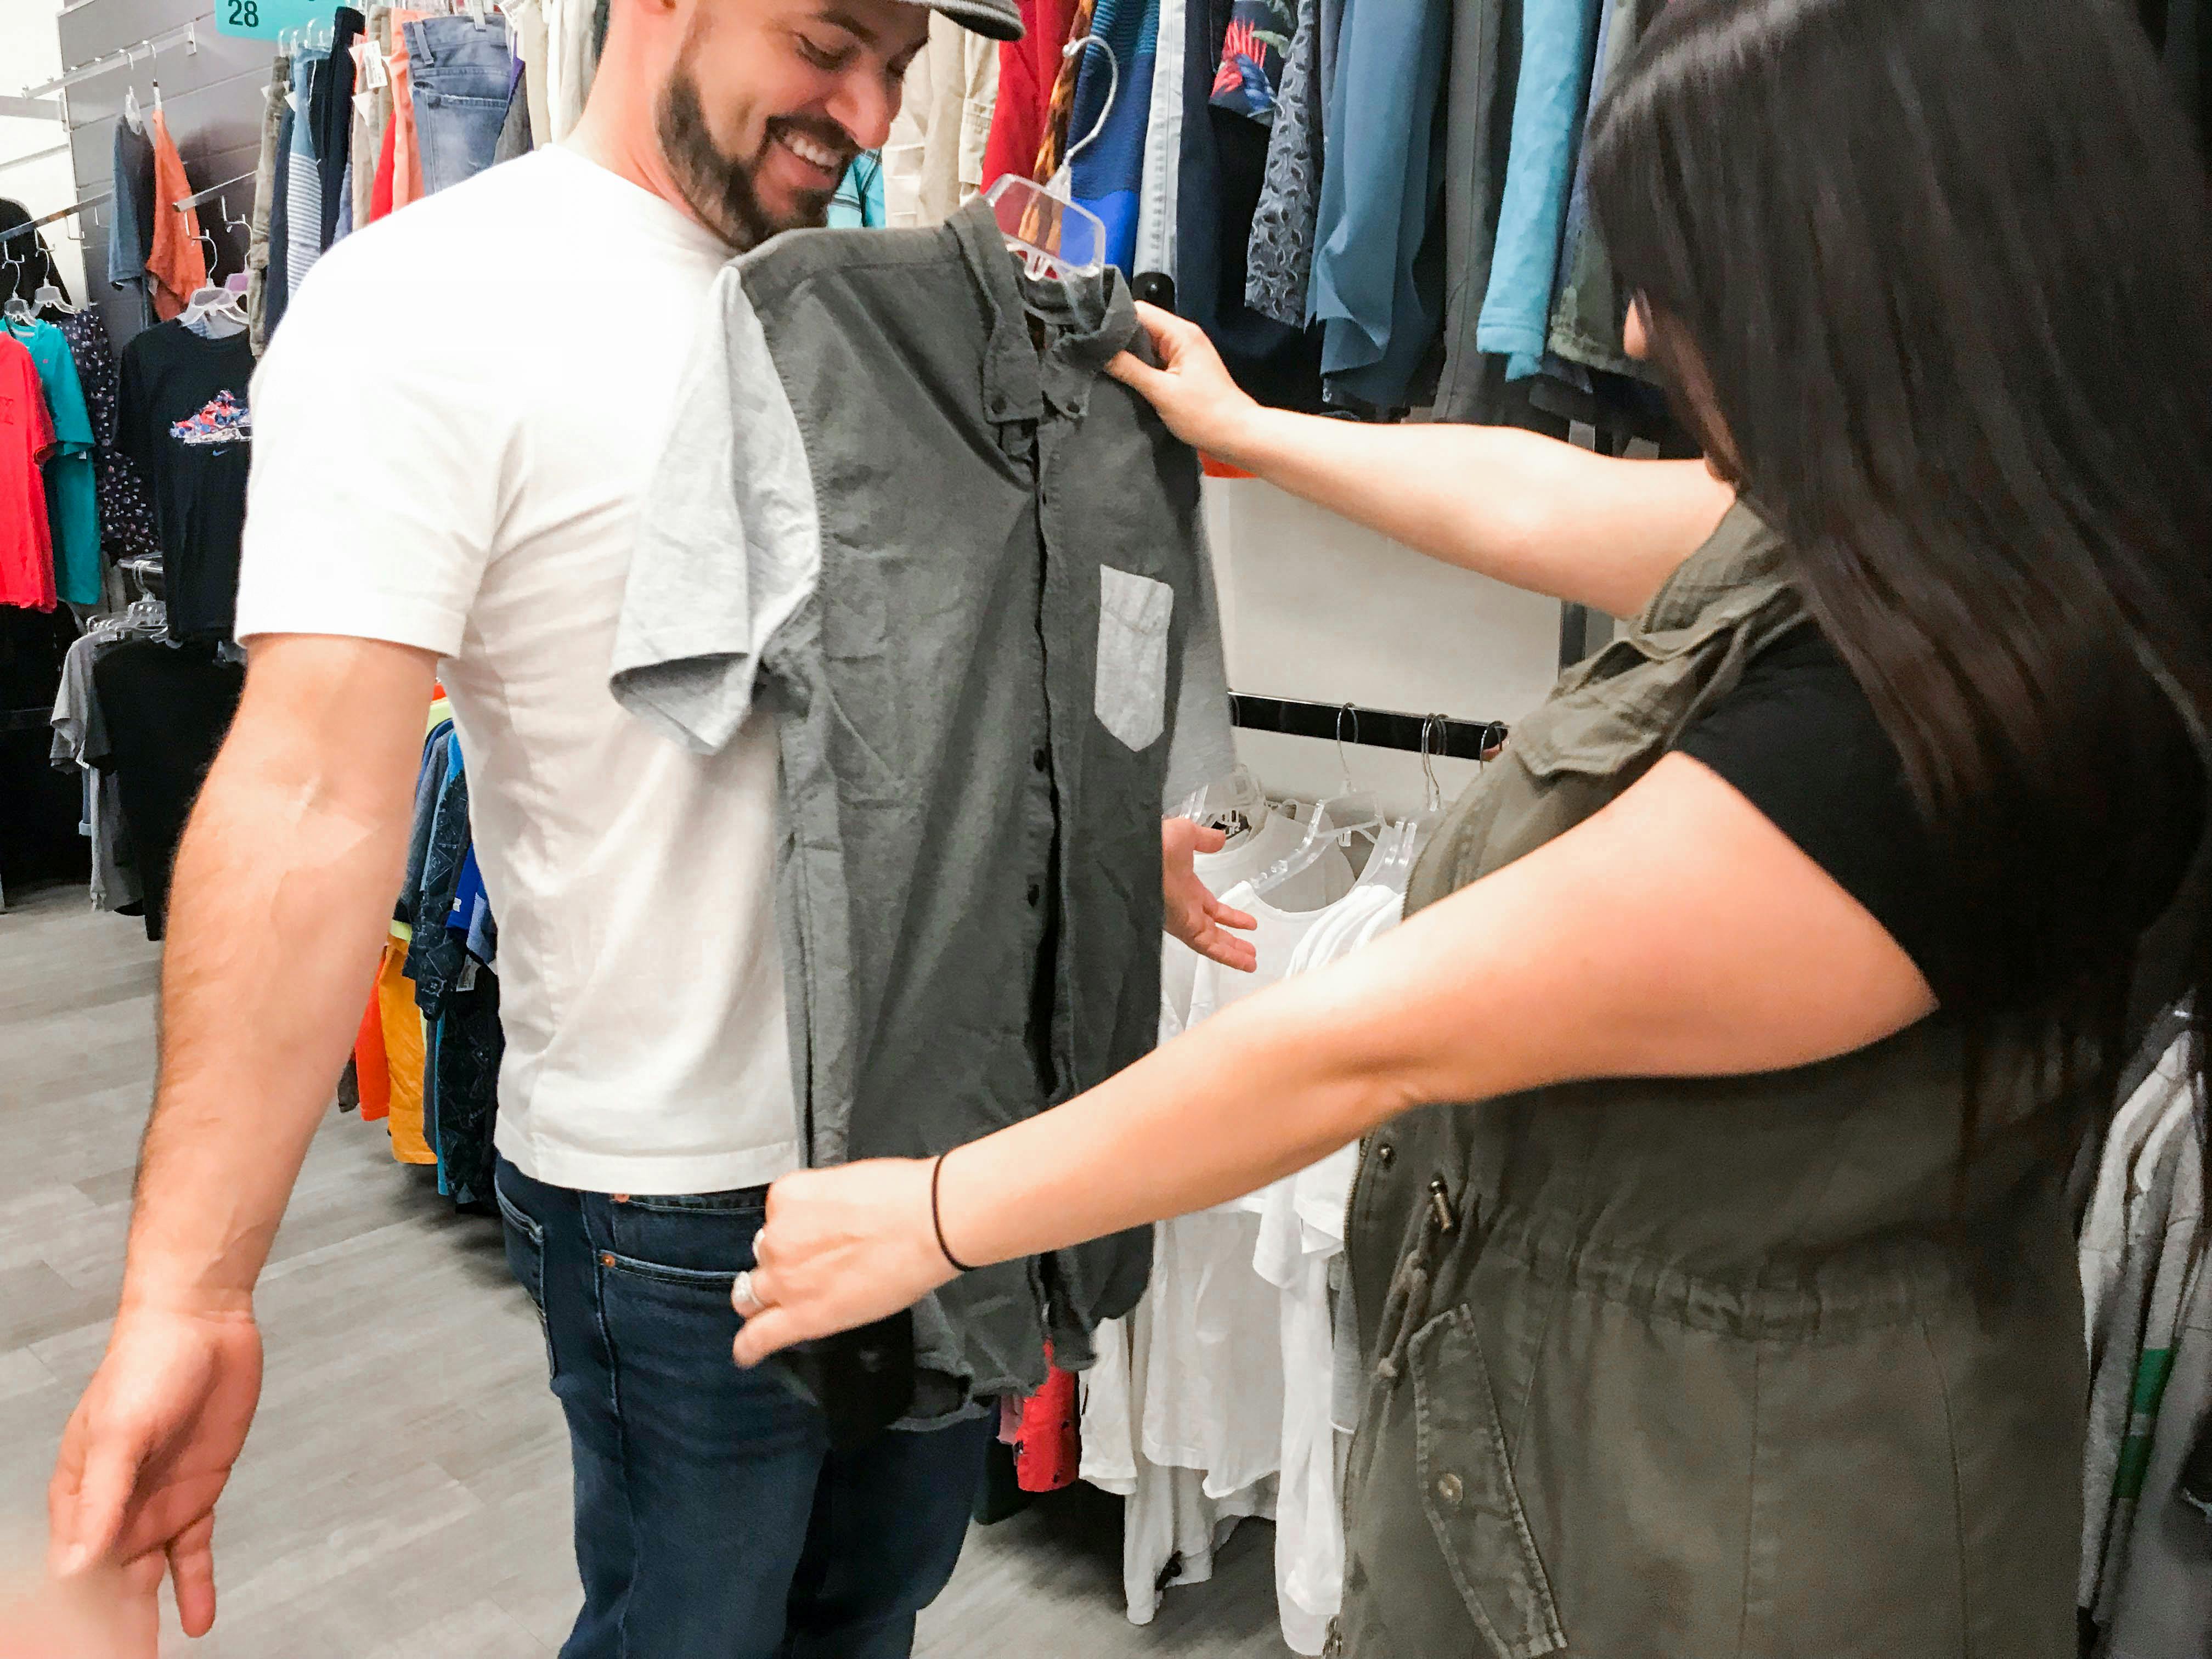 A woman holding up a shirt to a man to assess the size at Plato's closet